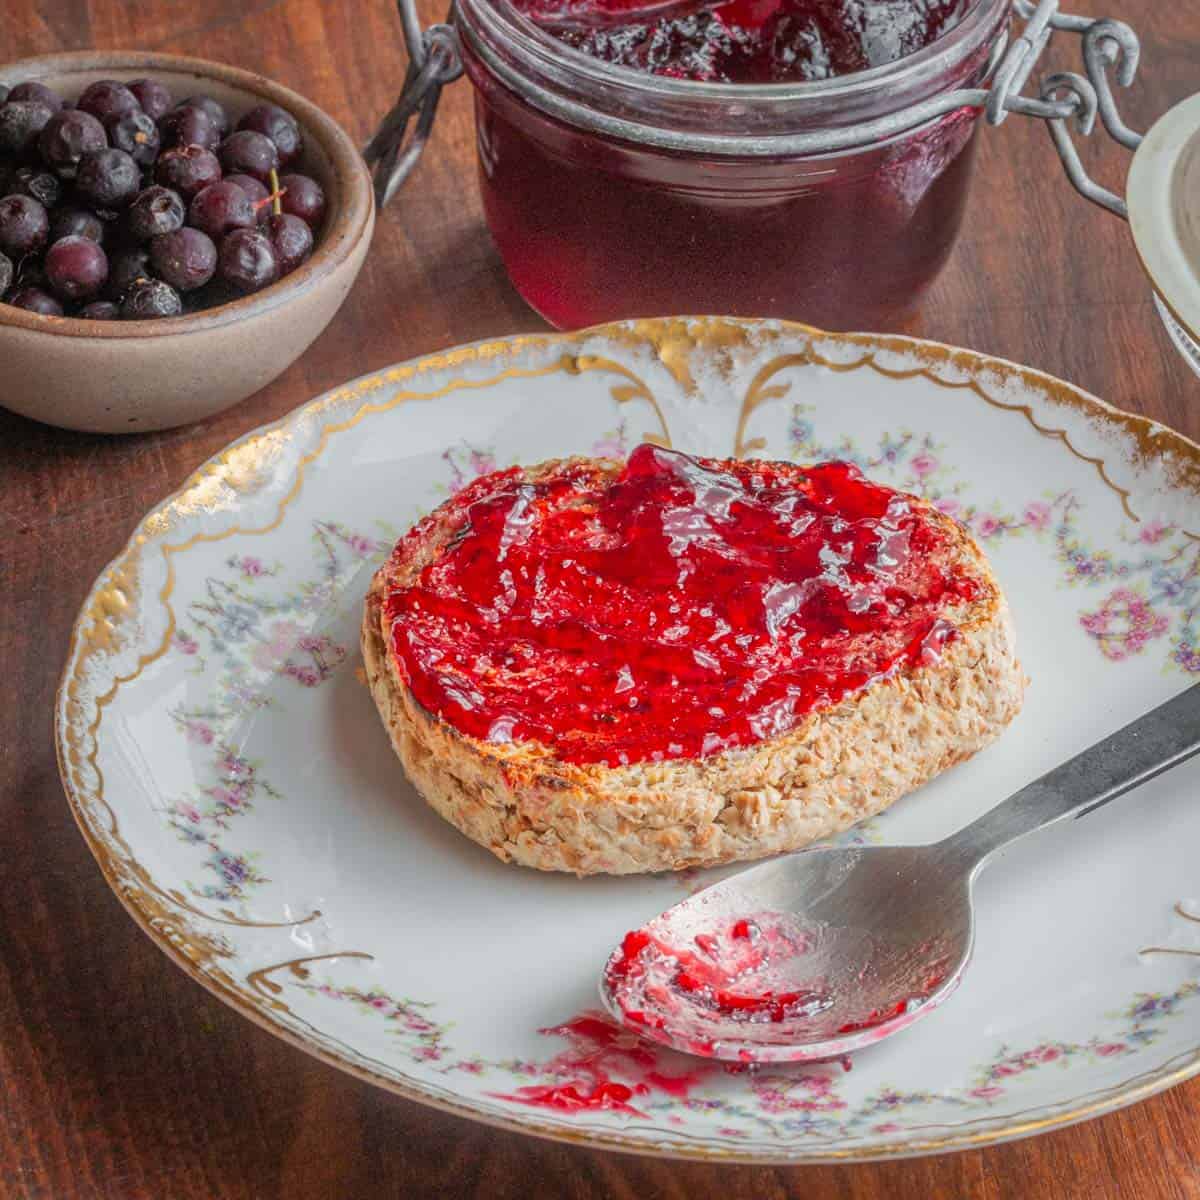 An English muffin spread with chokecherry jelly next to a jar of jelly and a bowl of wild cherries.